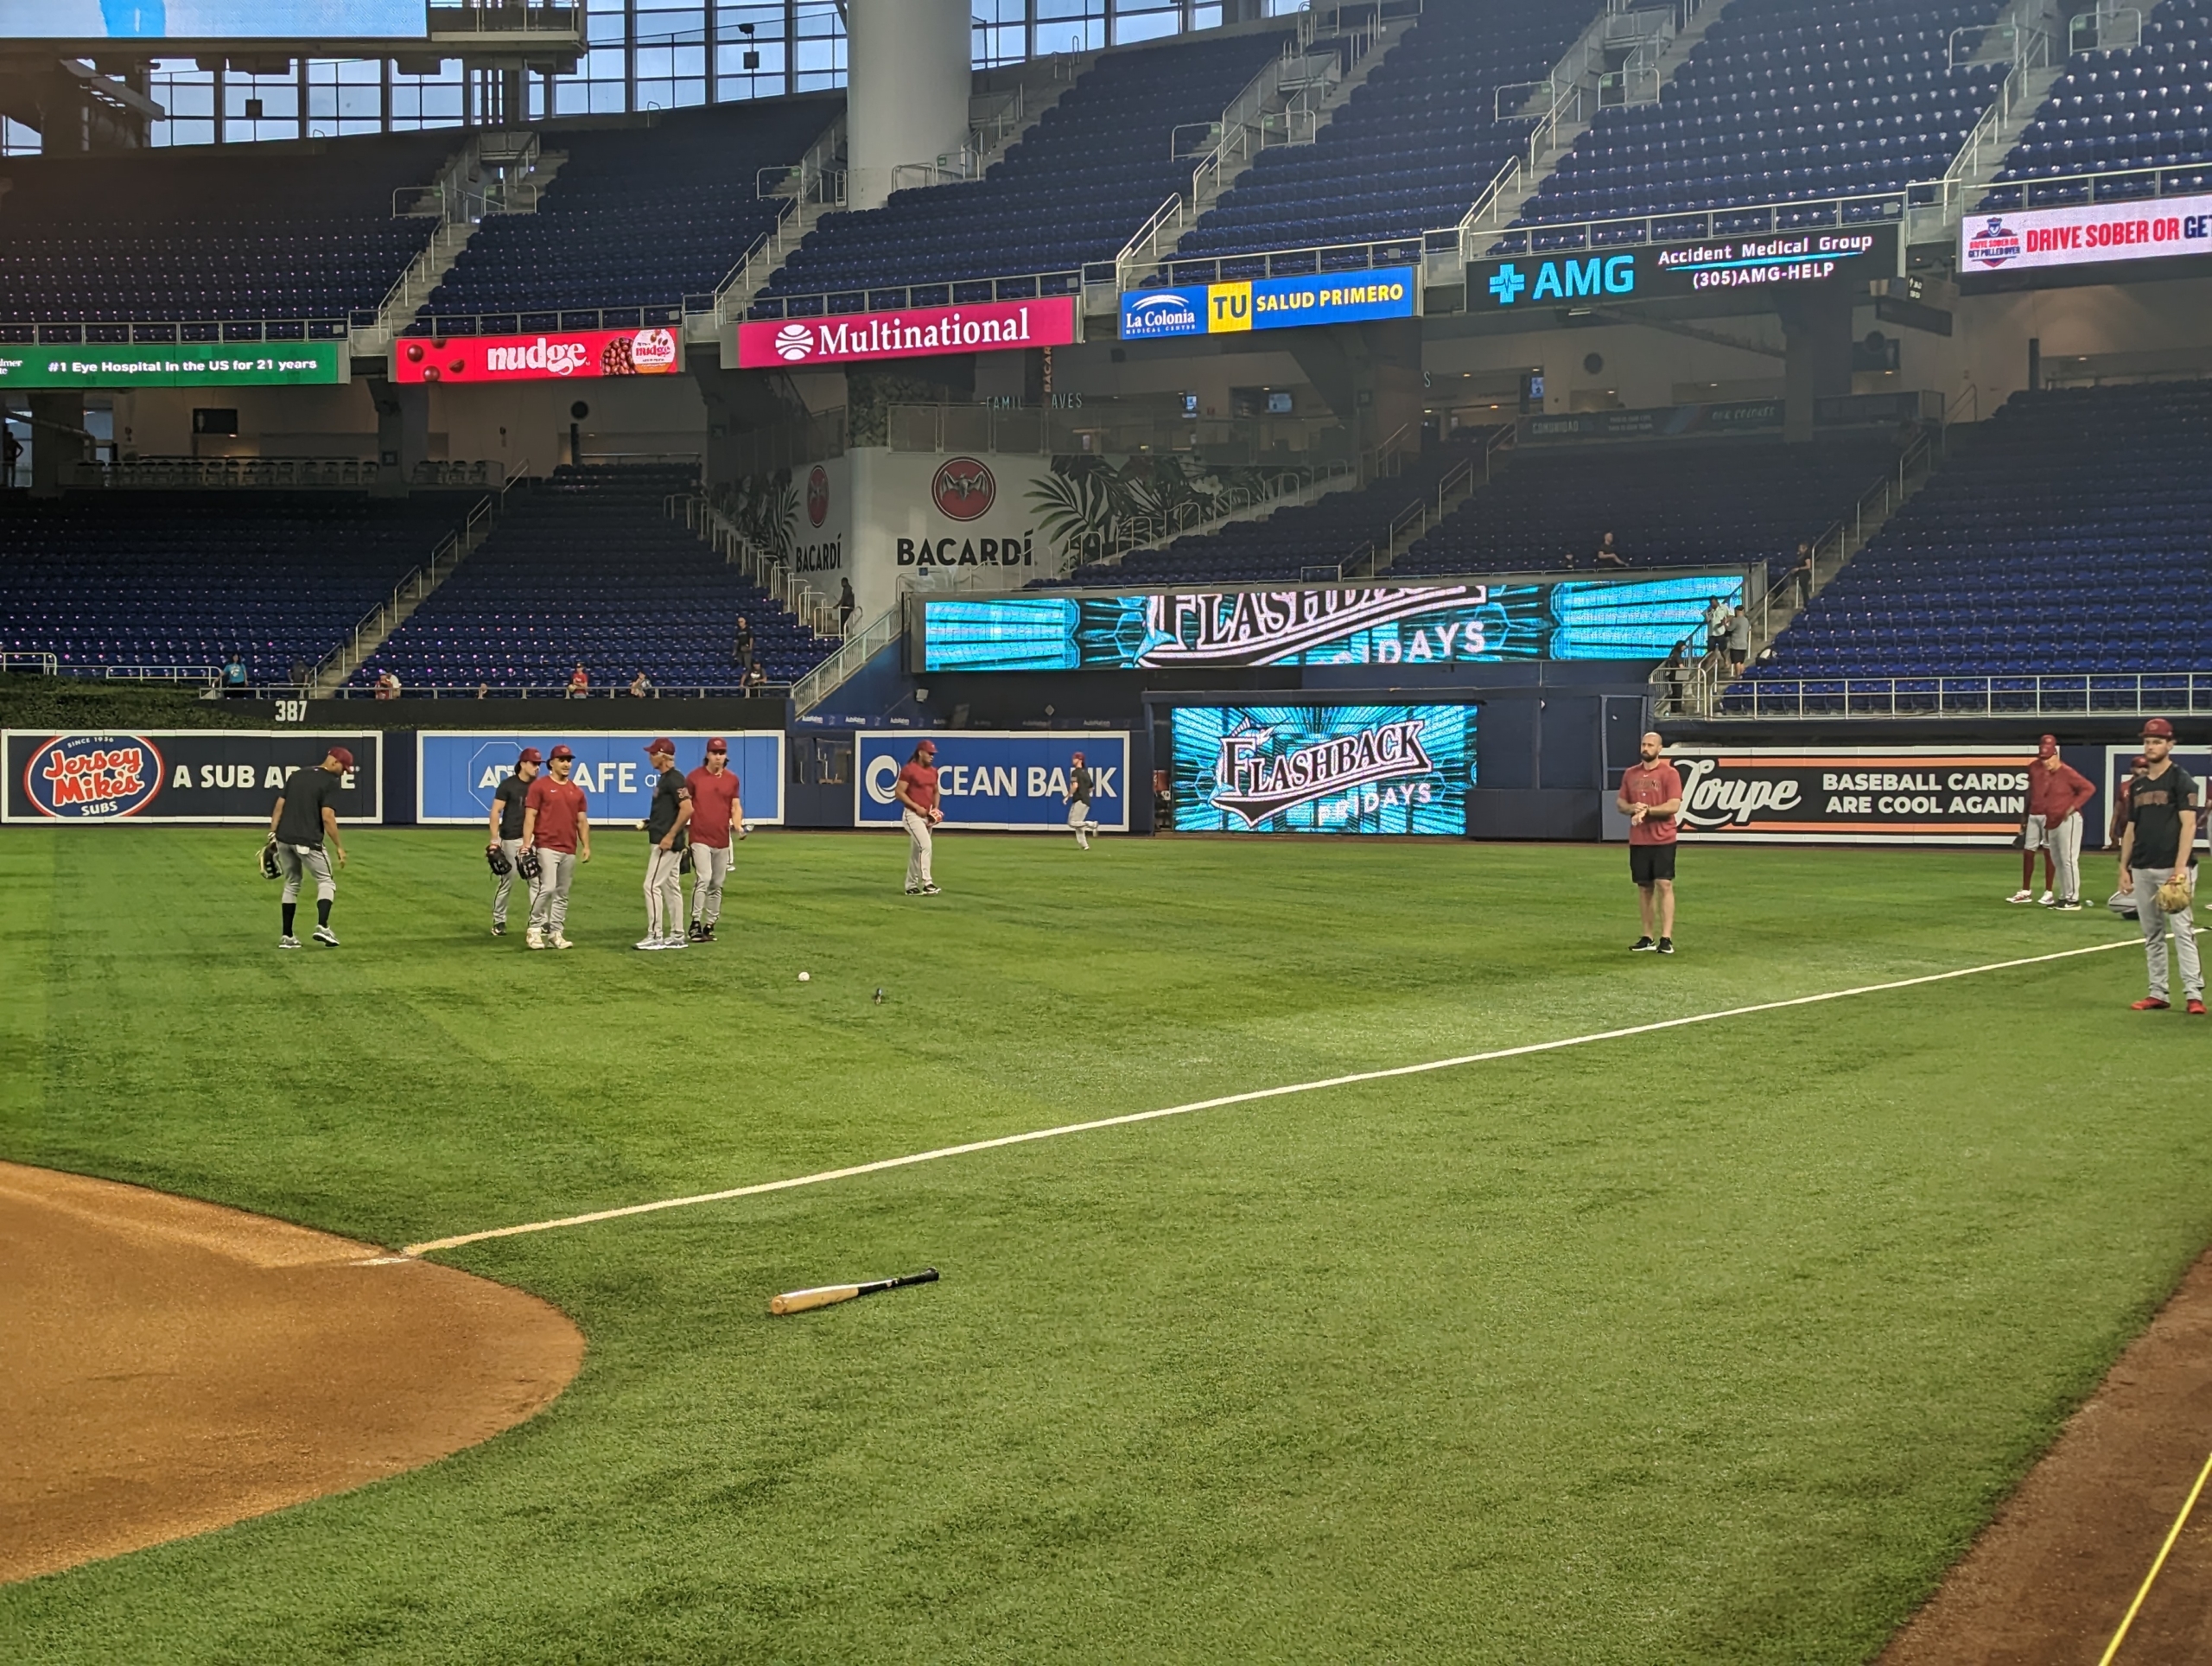 Diamondbacks outfielders speaking with the outfield coach during pregame warmups against the Marlins